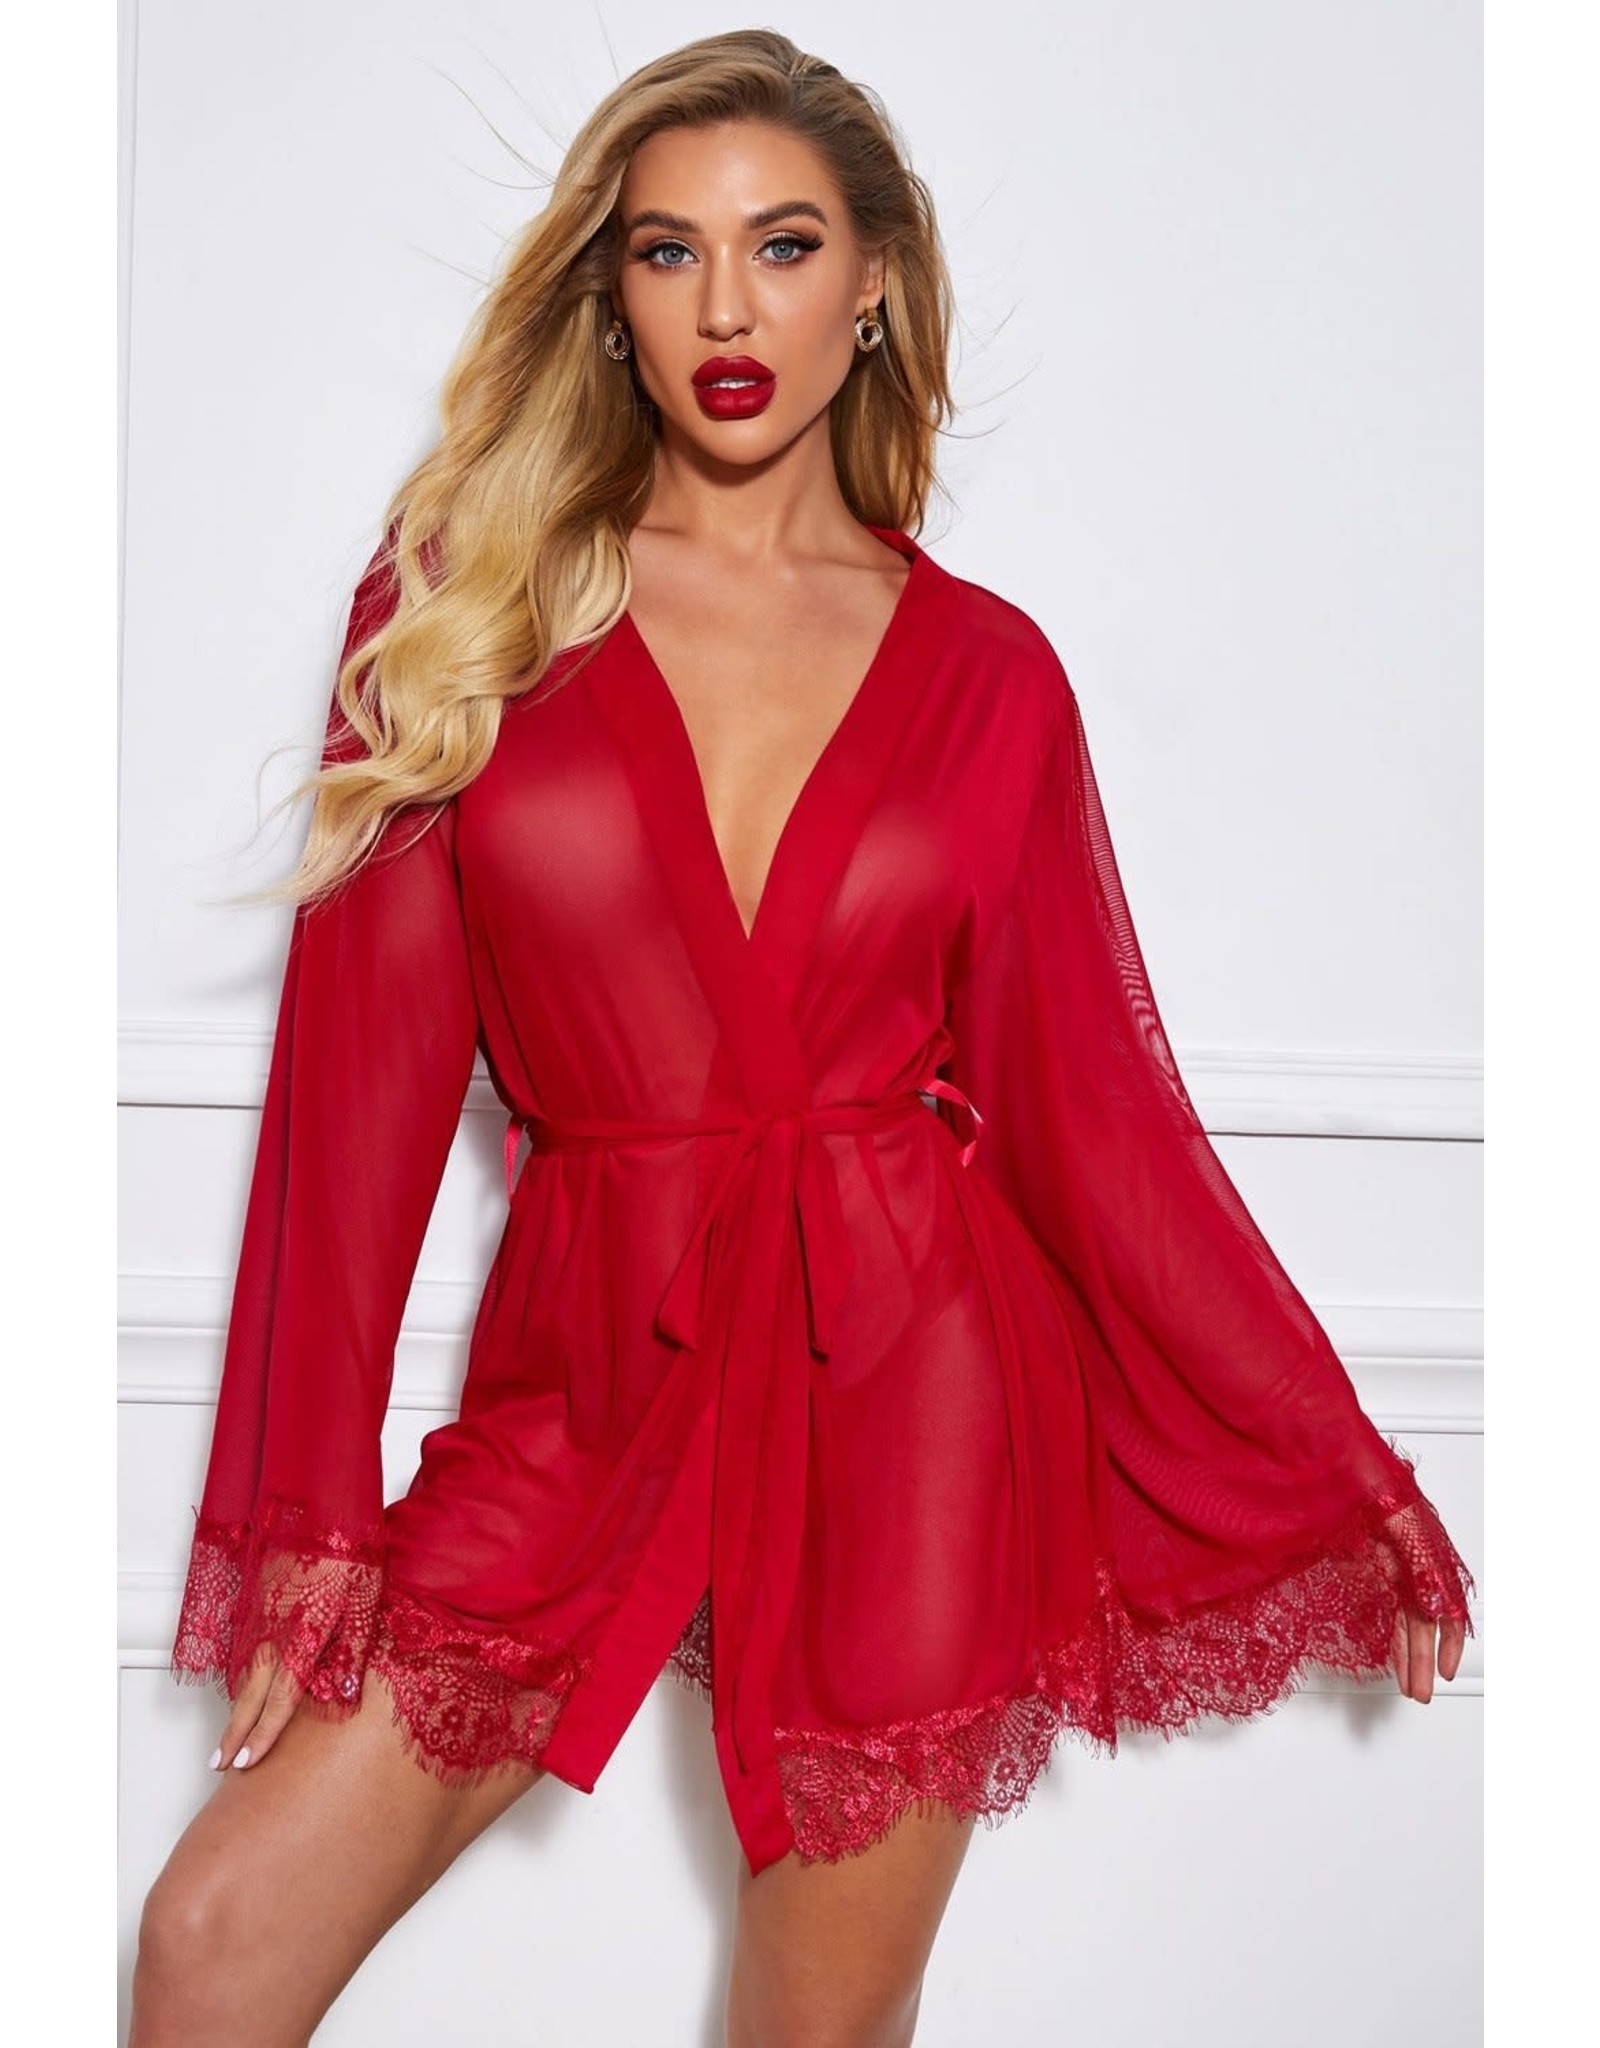 FOREPLAY BELL SLEEVES WRAPPED ROBE WITH THONG - (US 8-10)M